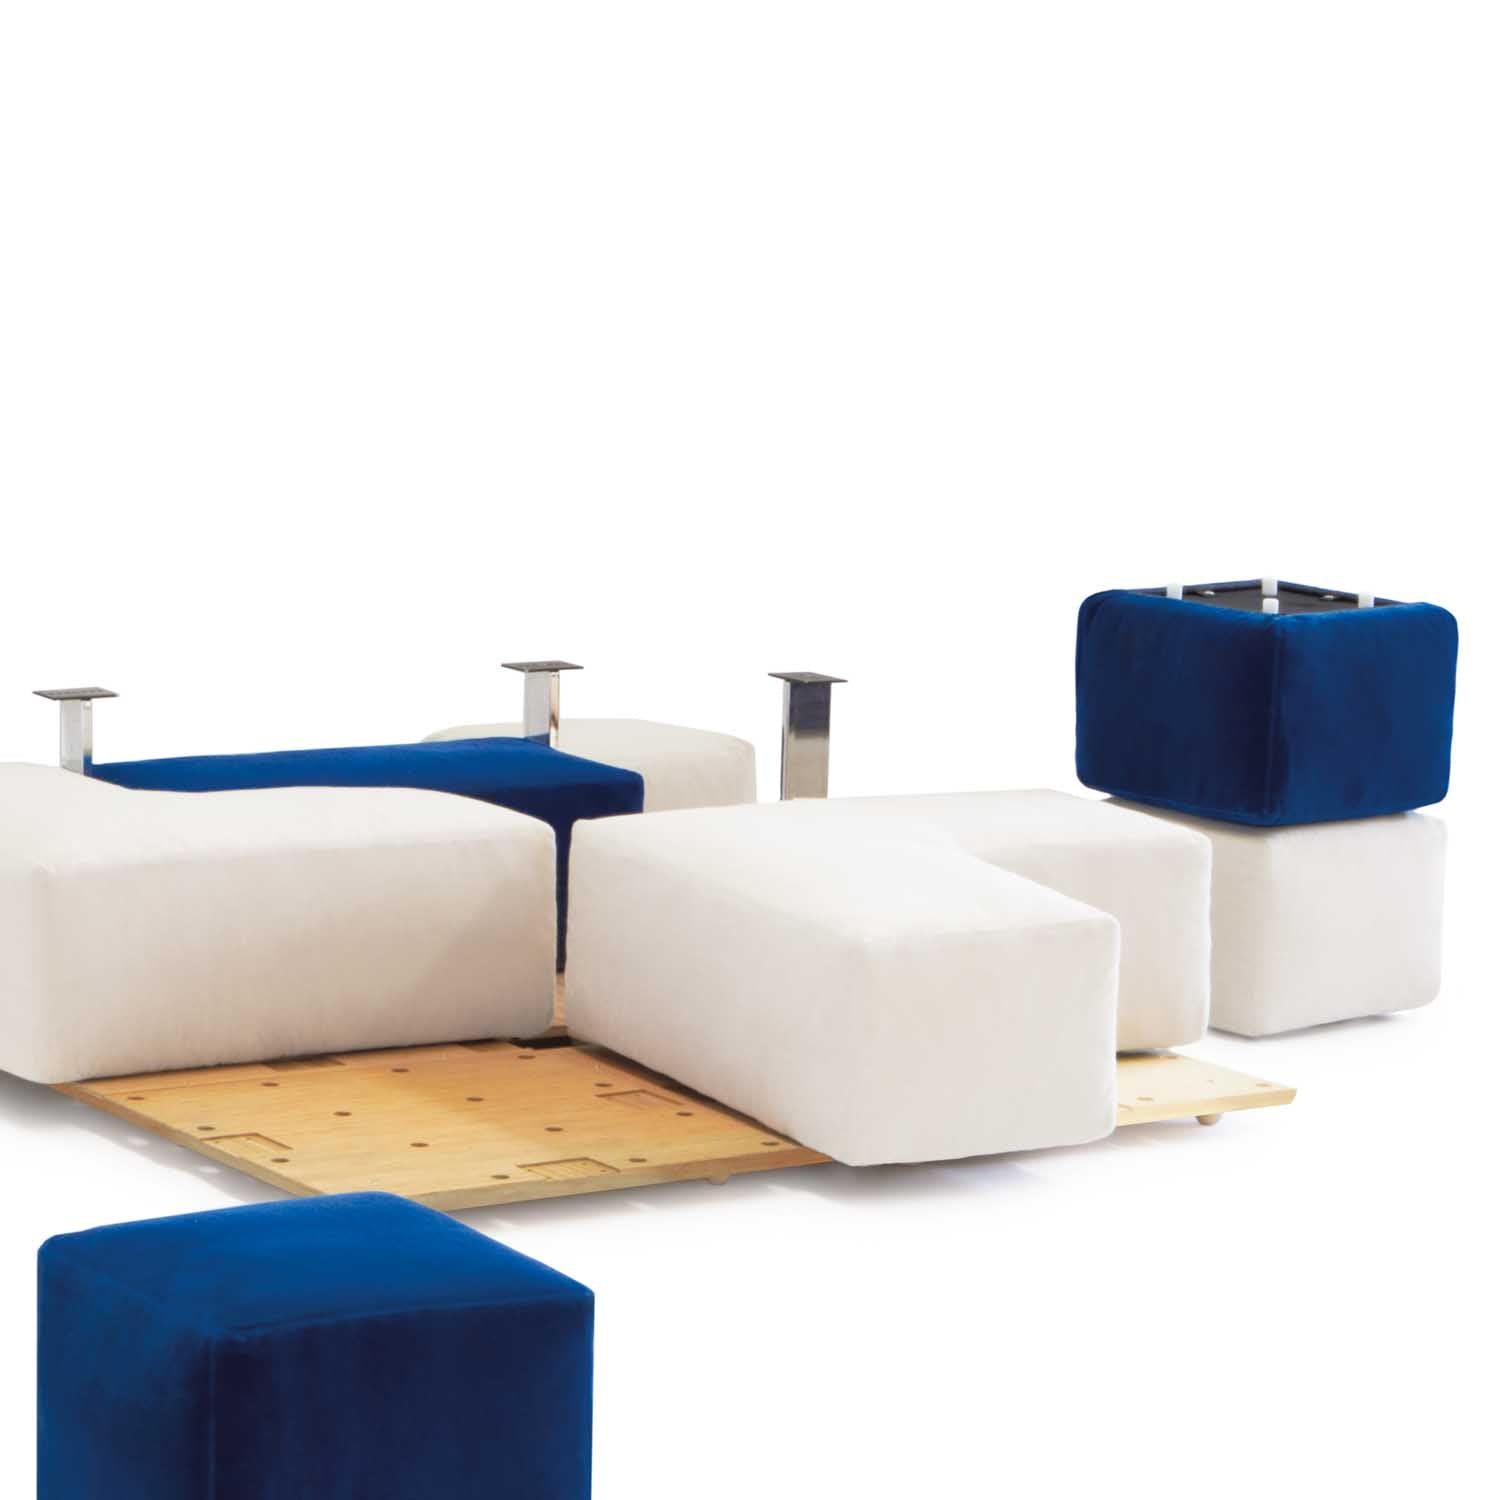 Square and rectangular cushion modules for tailored aesthetics.